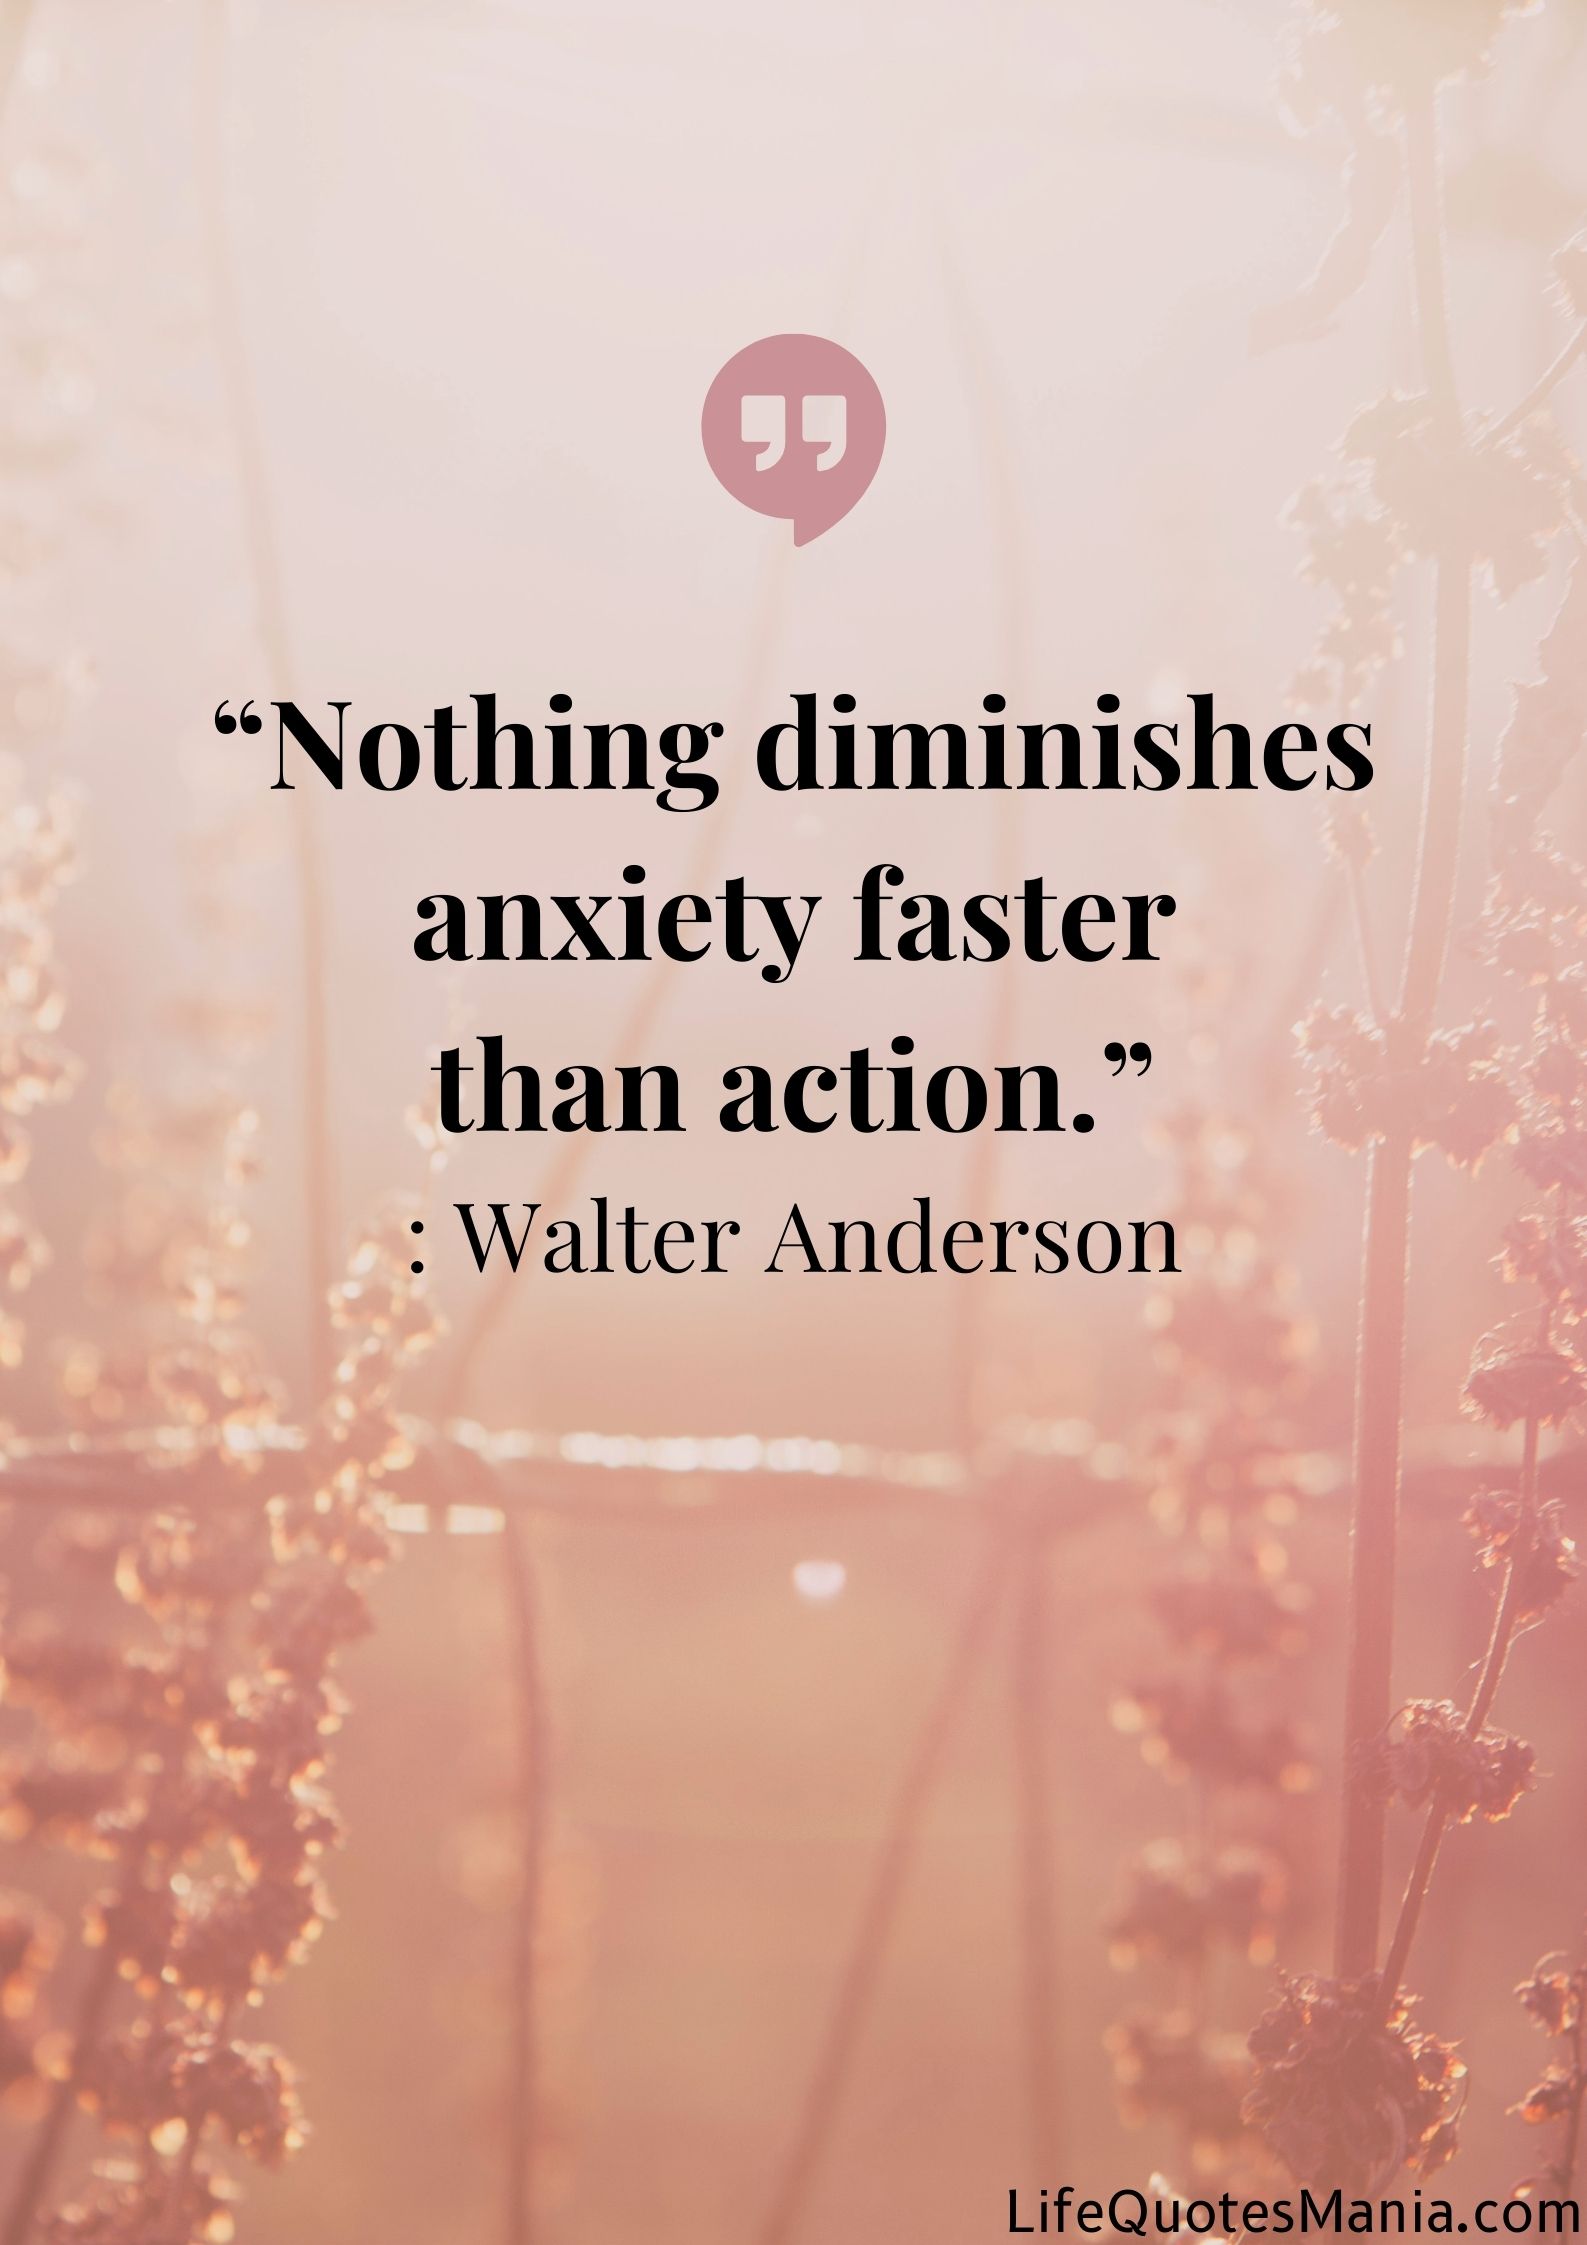 Anxiety Quotes - Walter Anderson